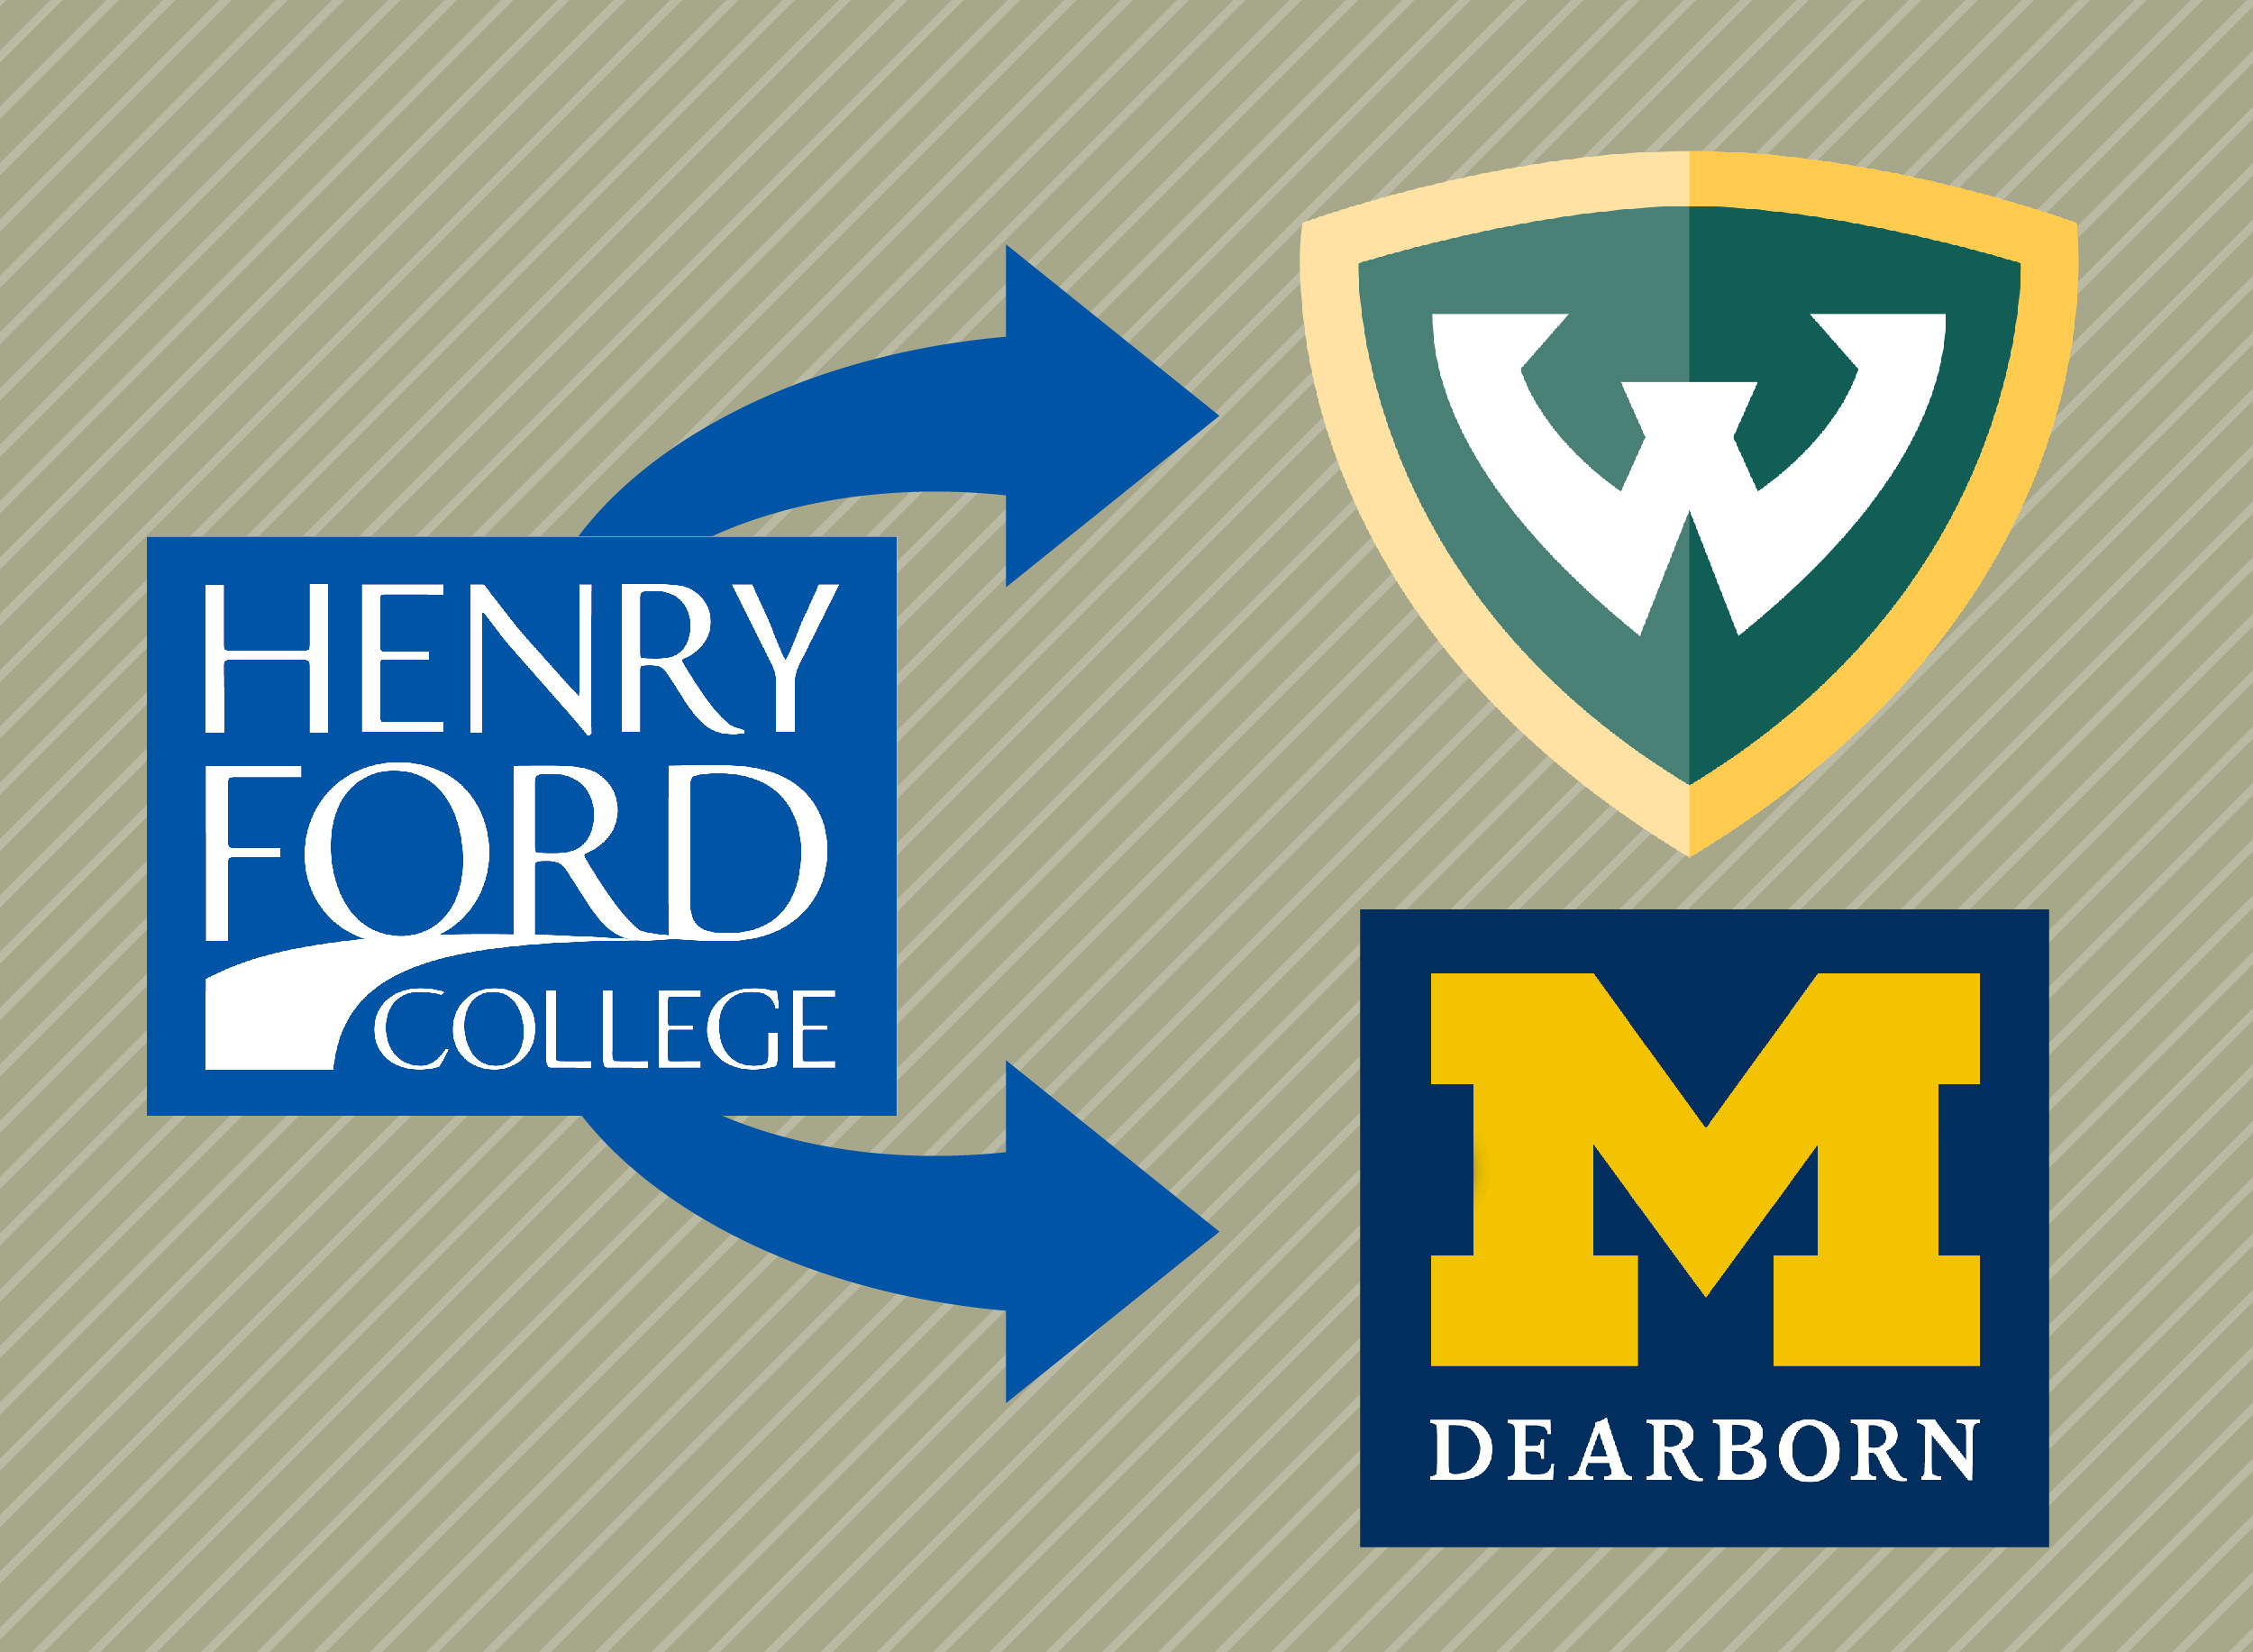 Graphic of HFC logo with arrows pointing to the Wayne State University and University of Michigan Dearborn logos.